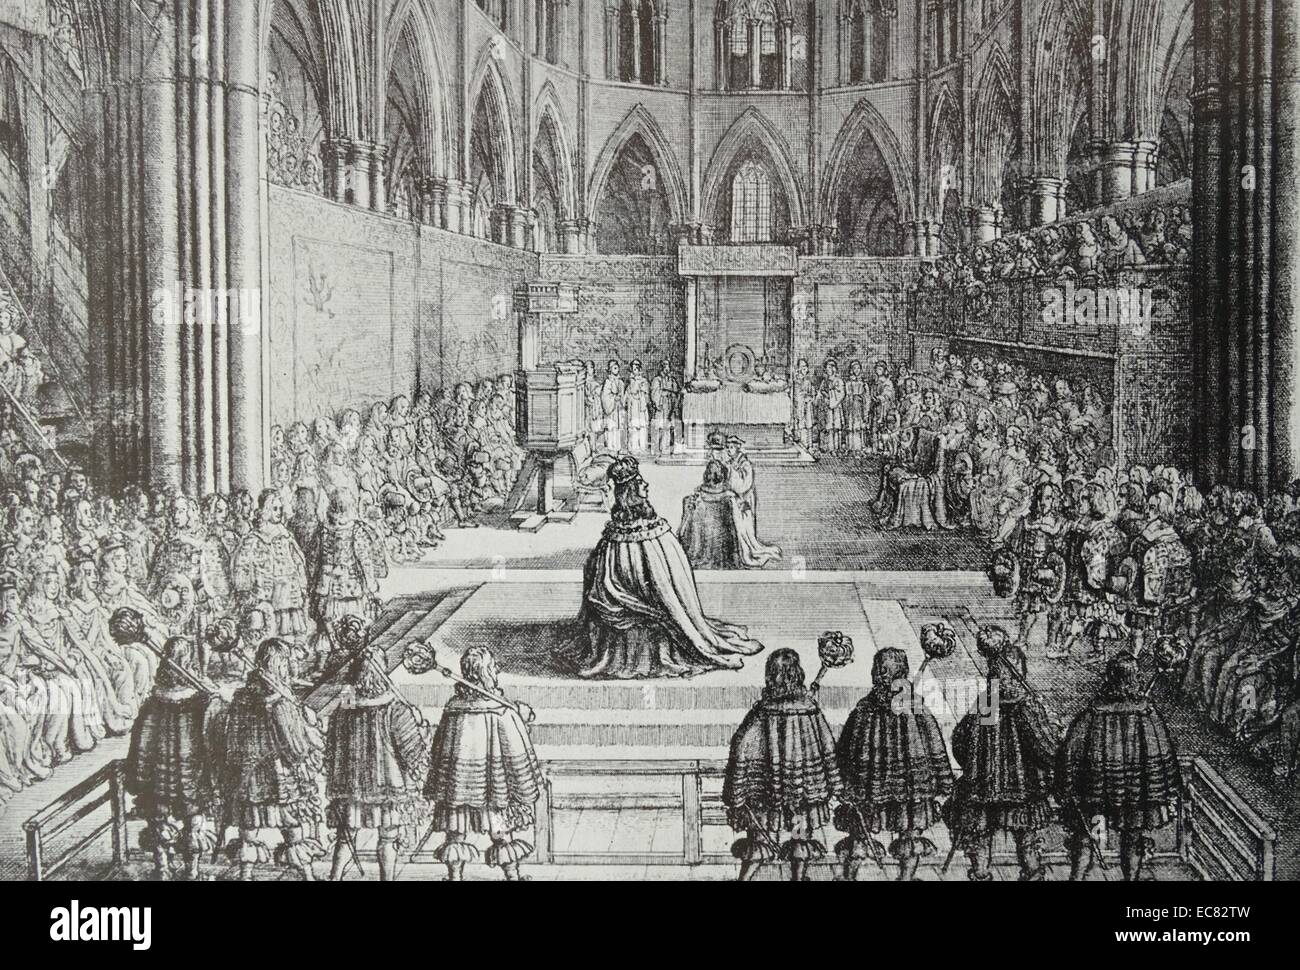 Engraving of the Coronation of King Charles II (1630-1685) monarch of the three kingdoms of England, Scotland, and Ireland. Executed at Whitehall on 30 January 1649, at the climax of the English Civil War. Dated 1660 Stock Photo